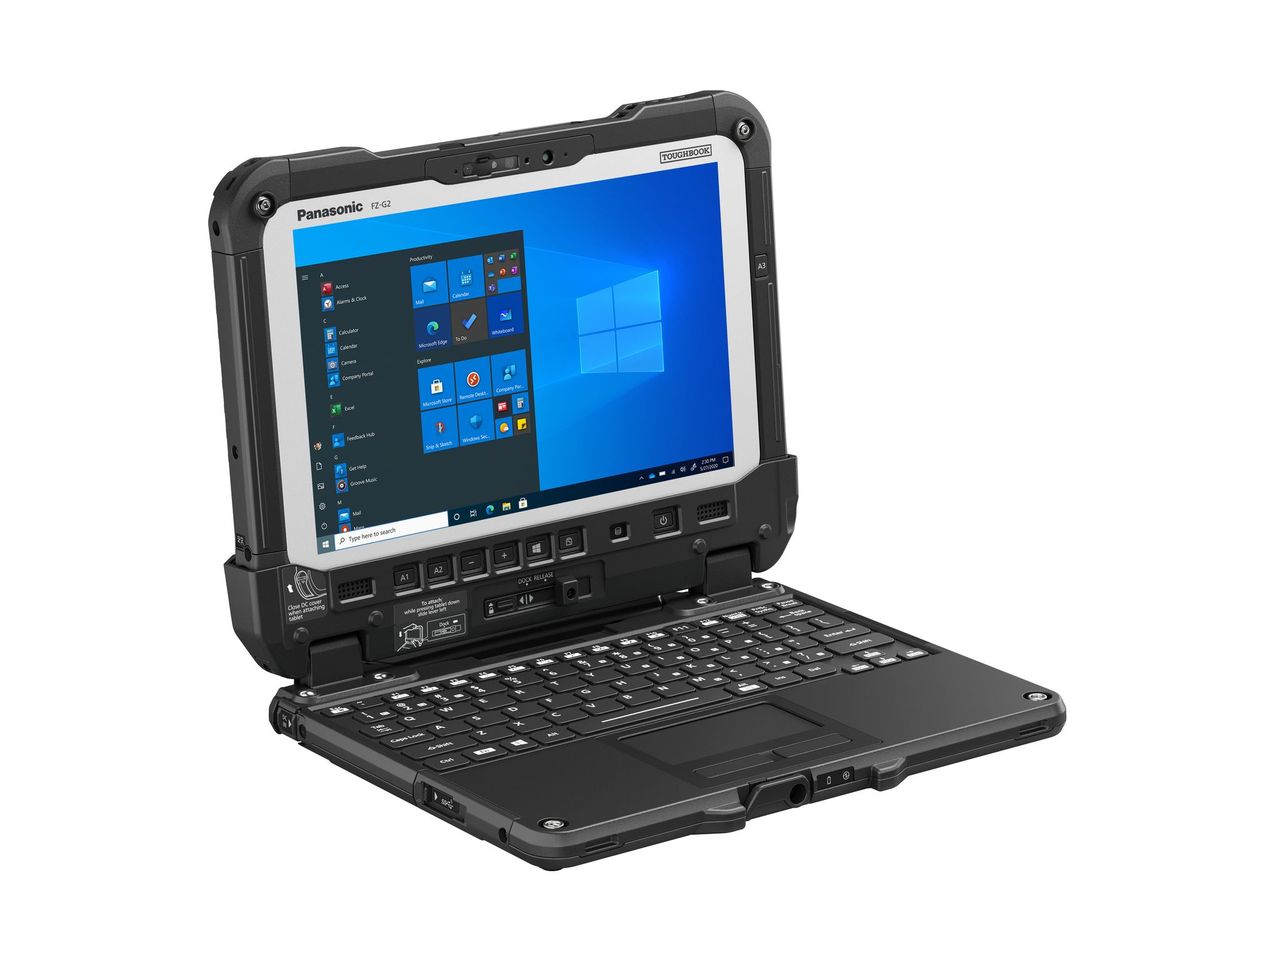 The TOUGHBOOK G2 rugged laptop